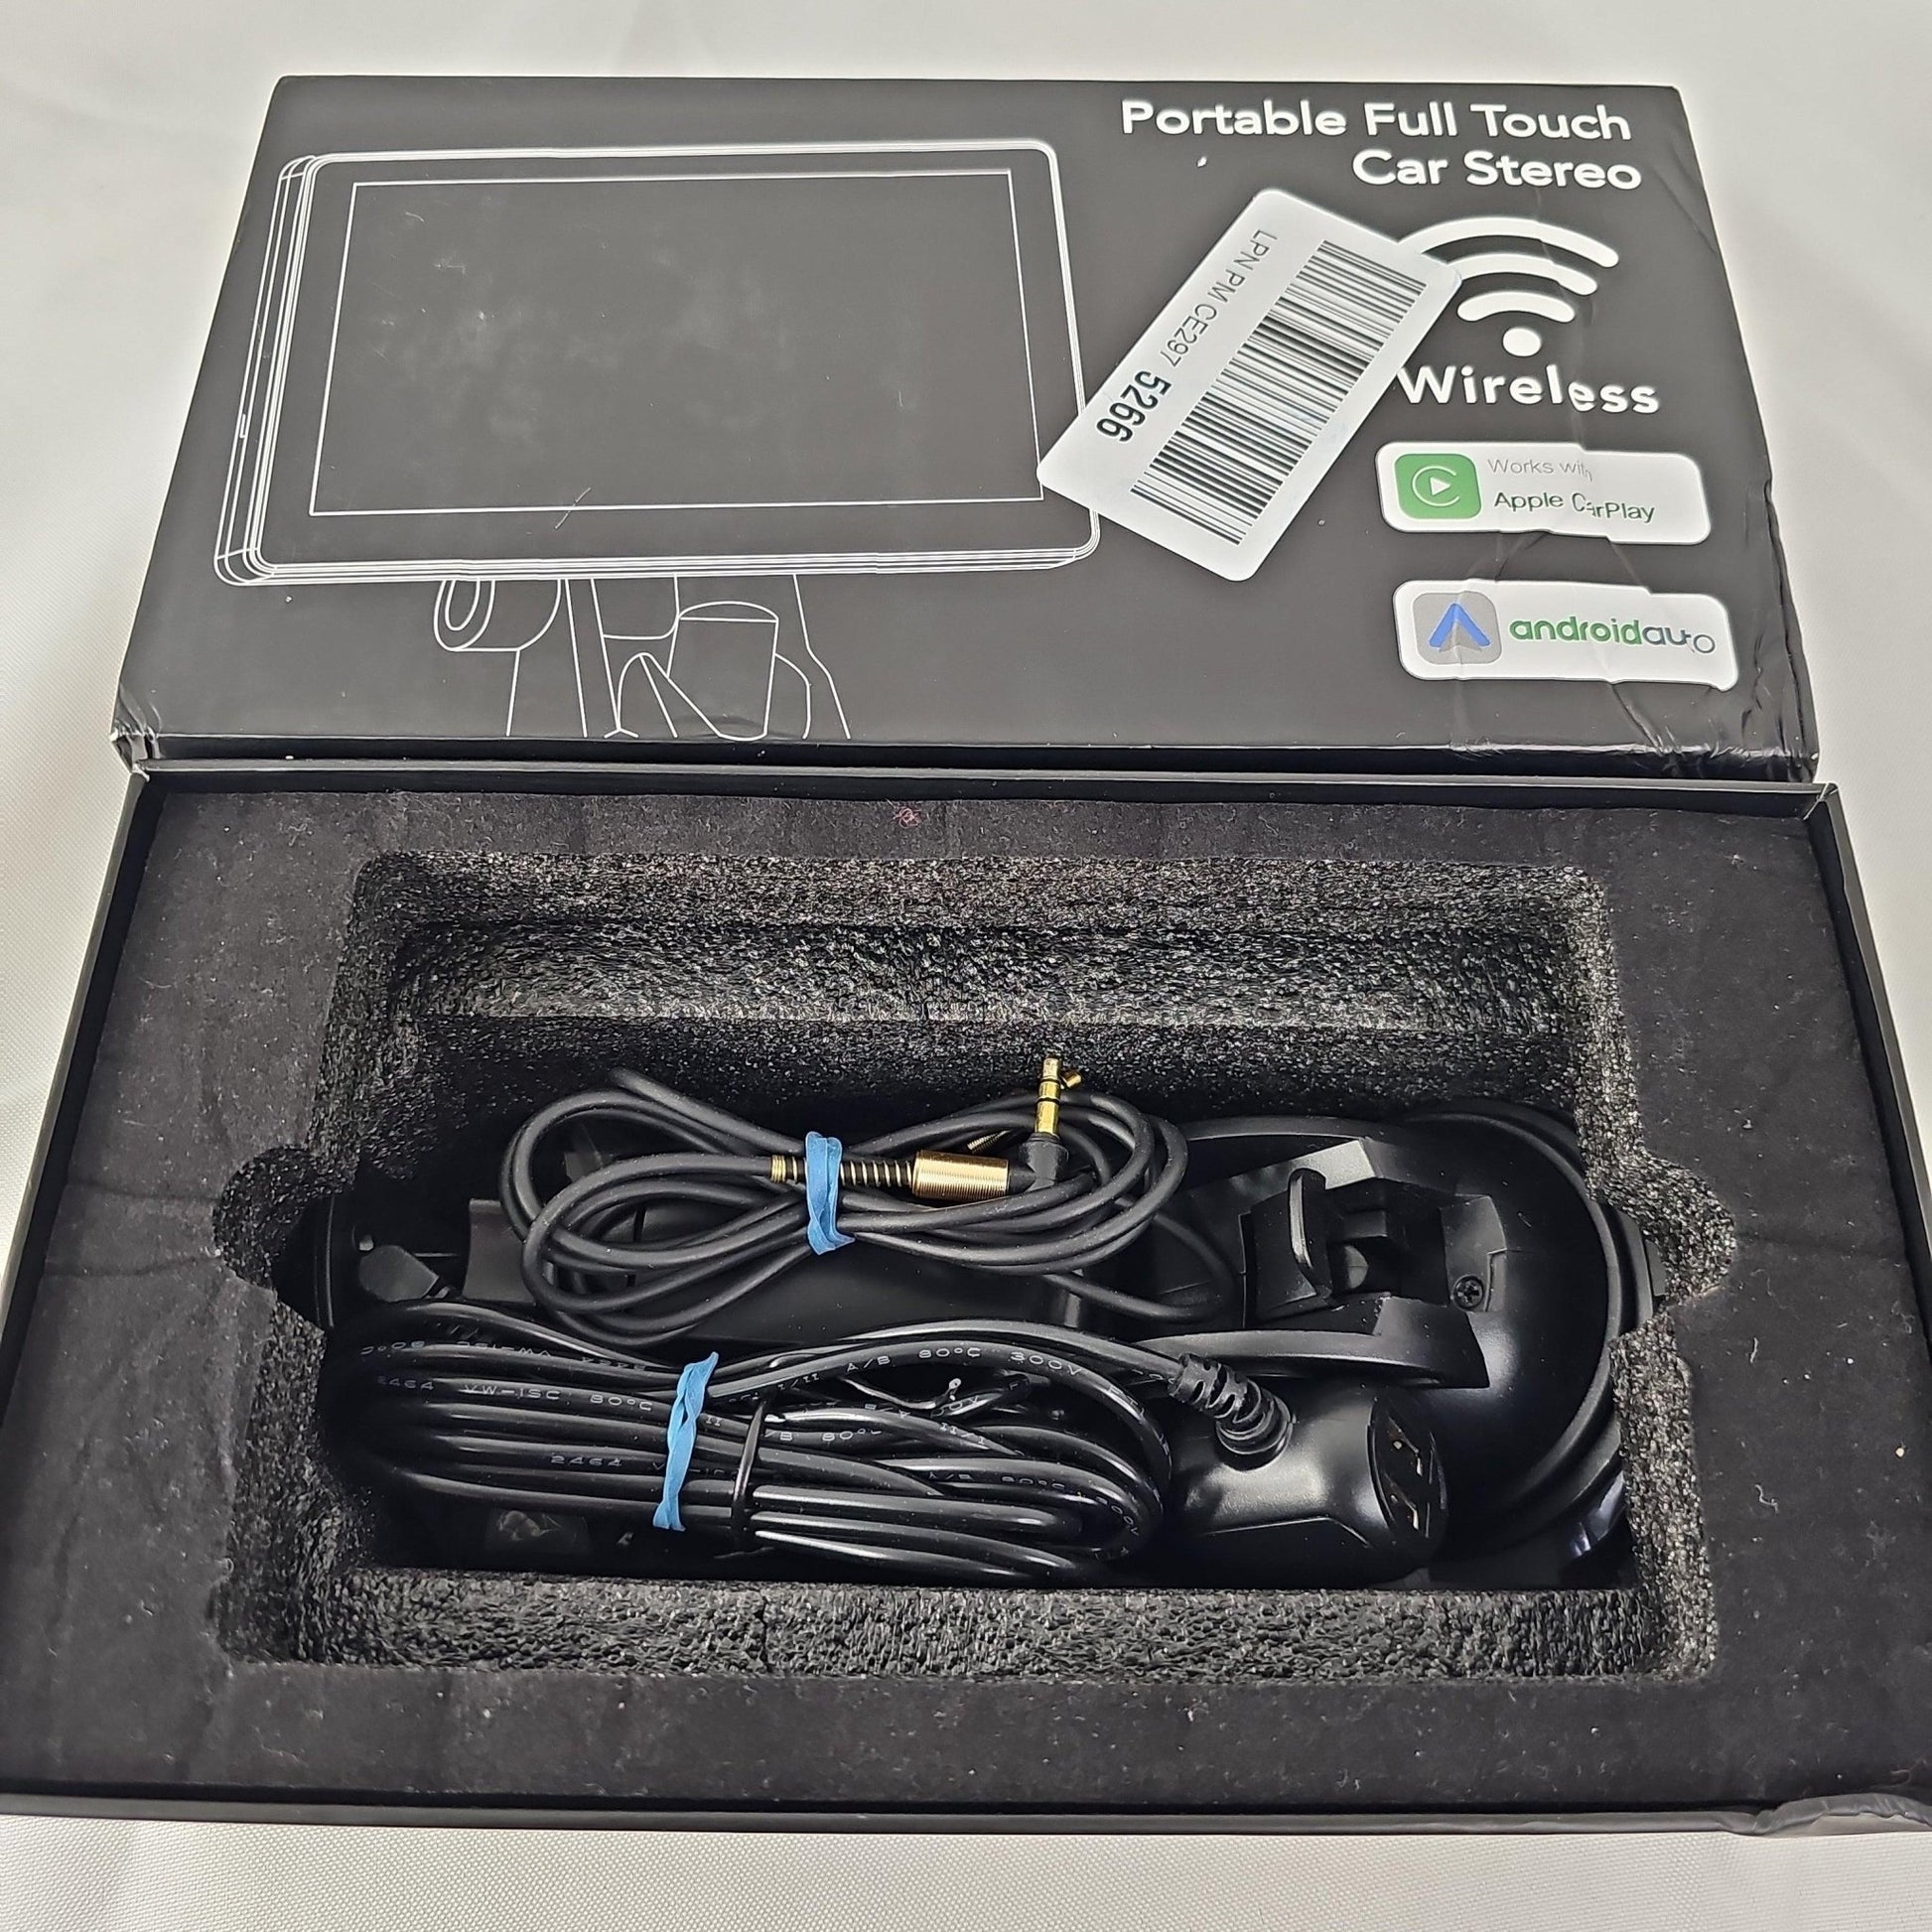 Portable Full Touch Car Stereo Wireless 7 in. - DQ Distribution